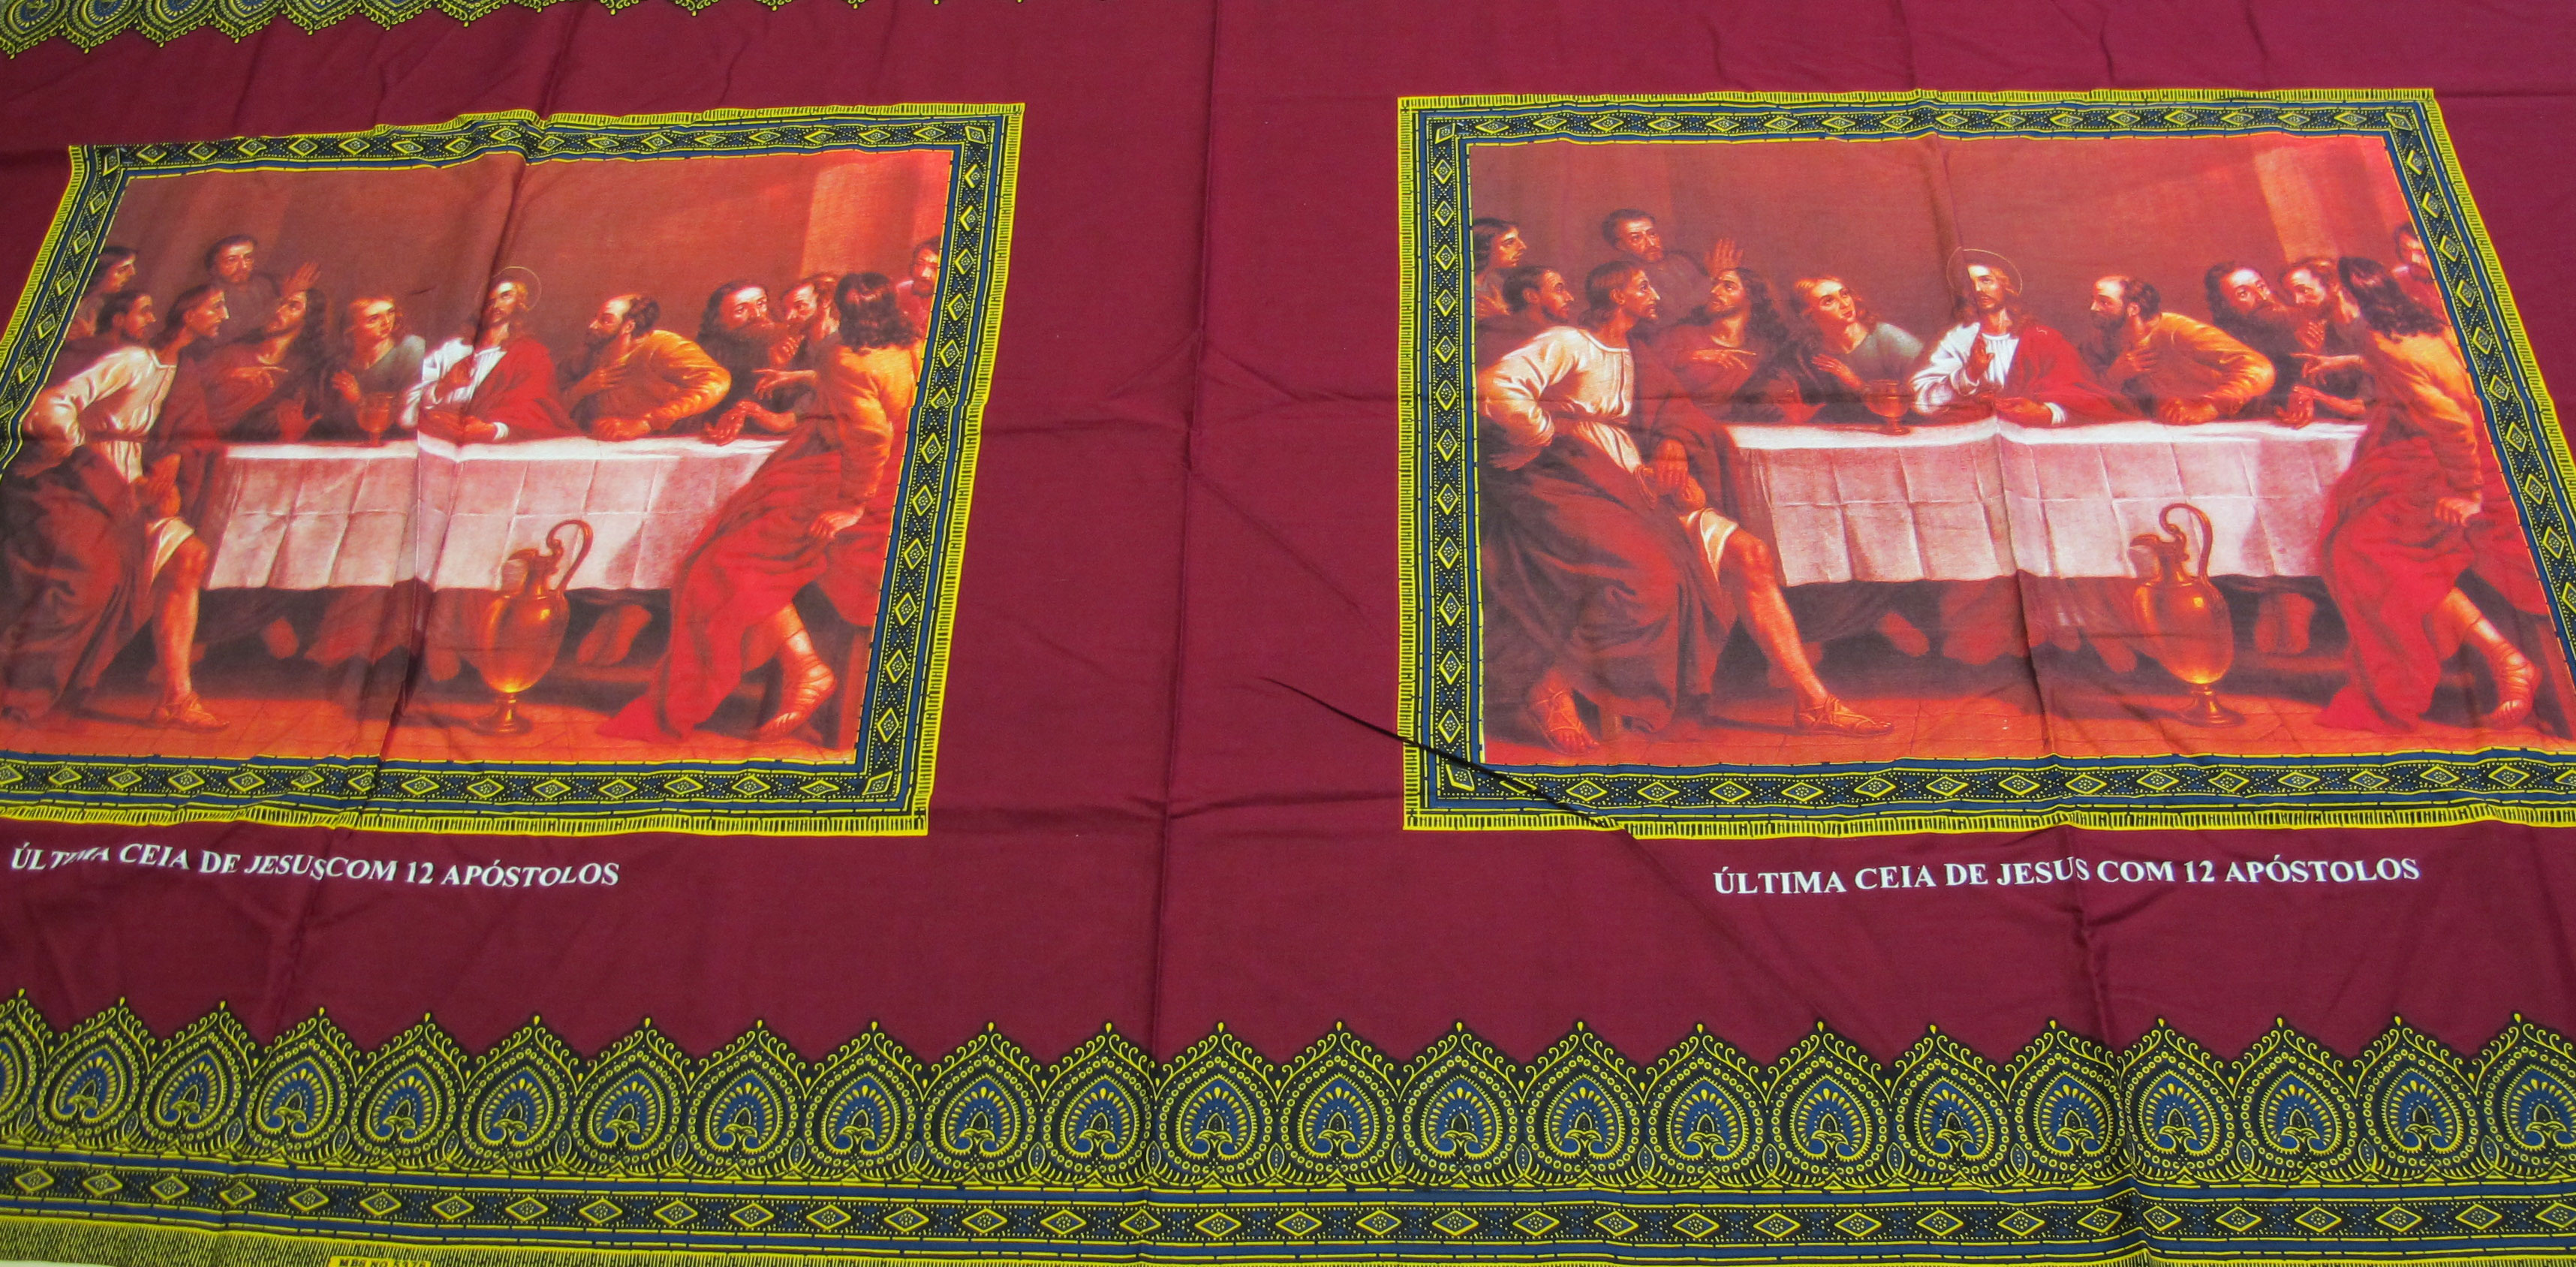 Cotton cloth printed with a representation of the Last Supper with Jesus and the twelve apostles, commemorating the Christian faith: Africa, Southern Africa, Mozambique, c.1994.